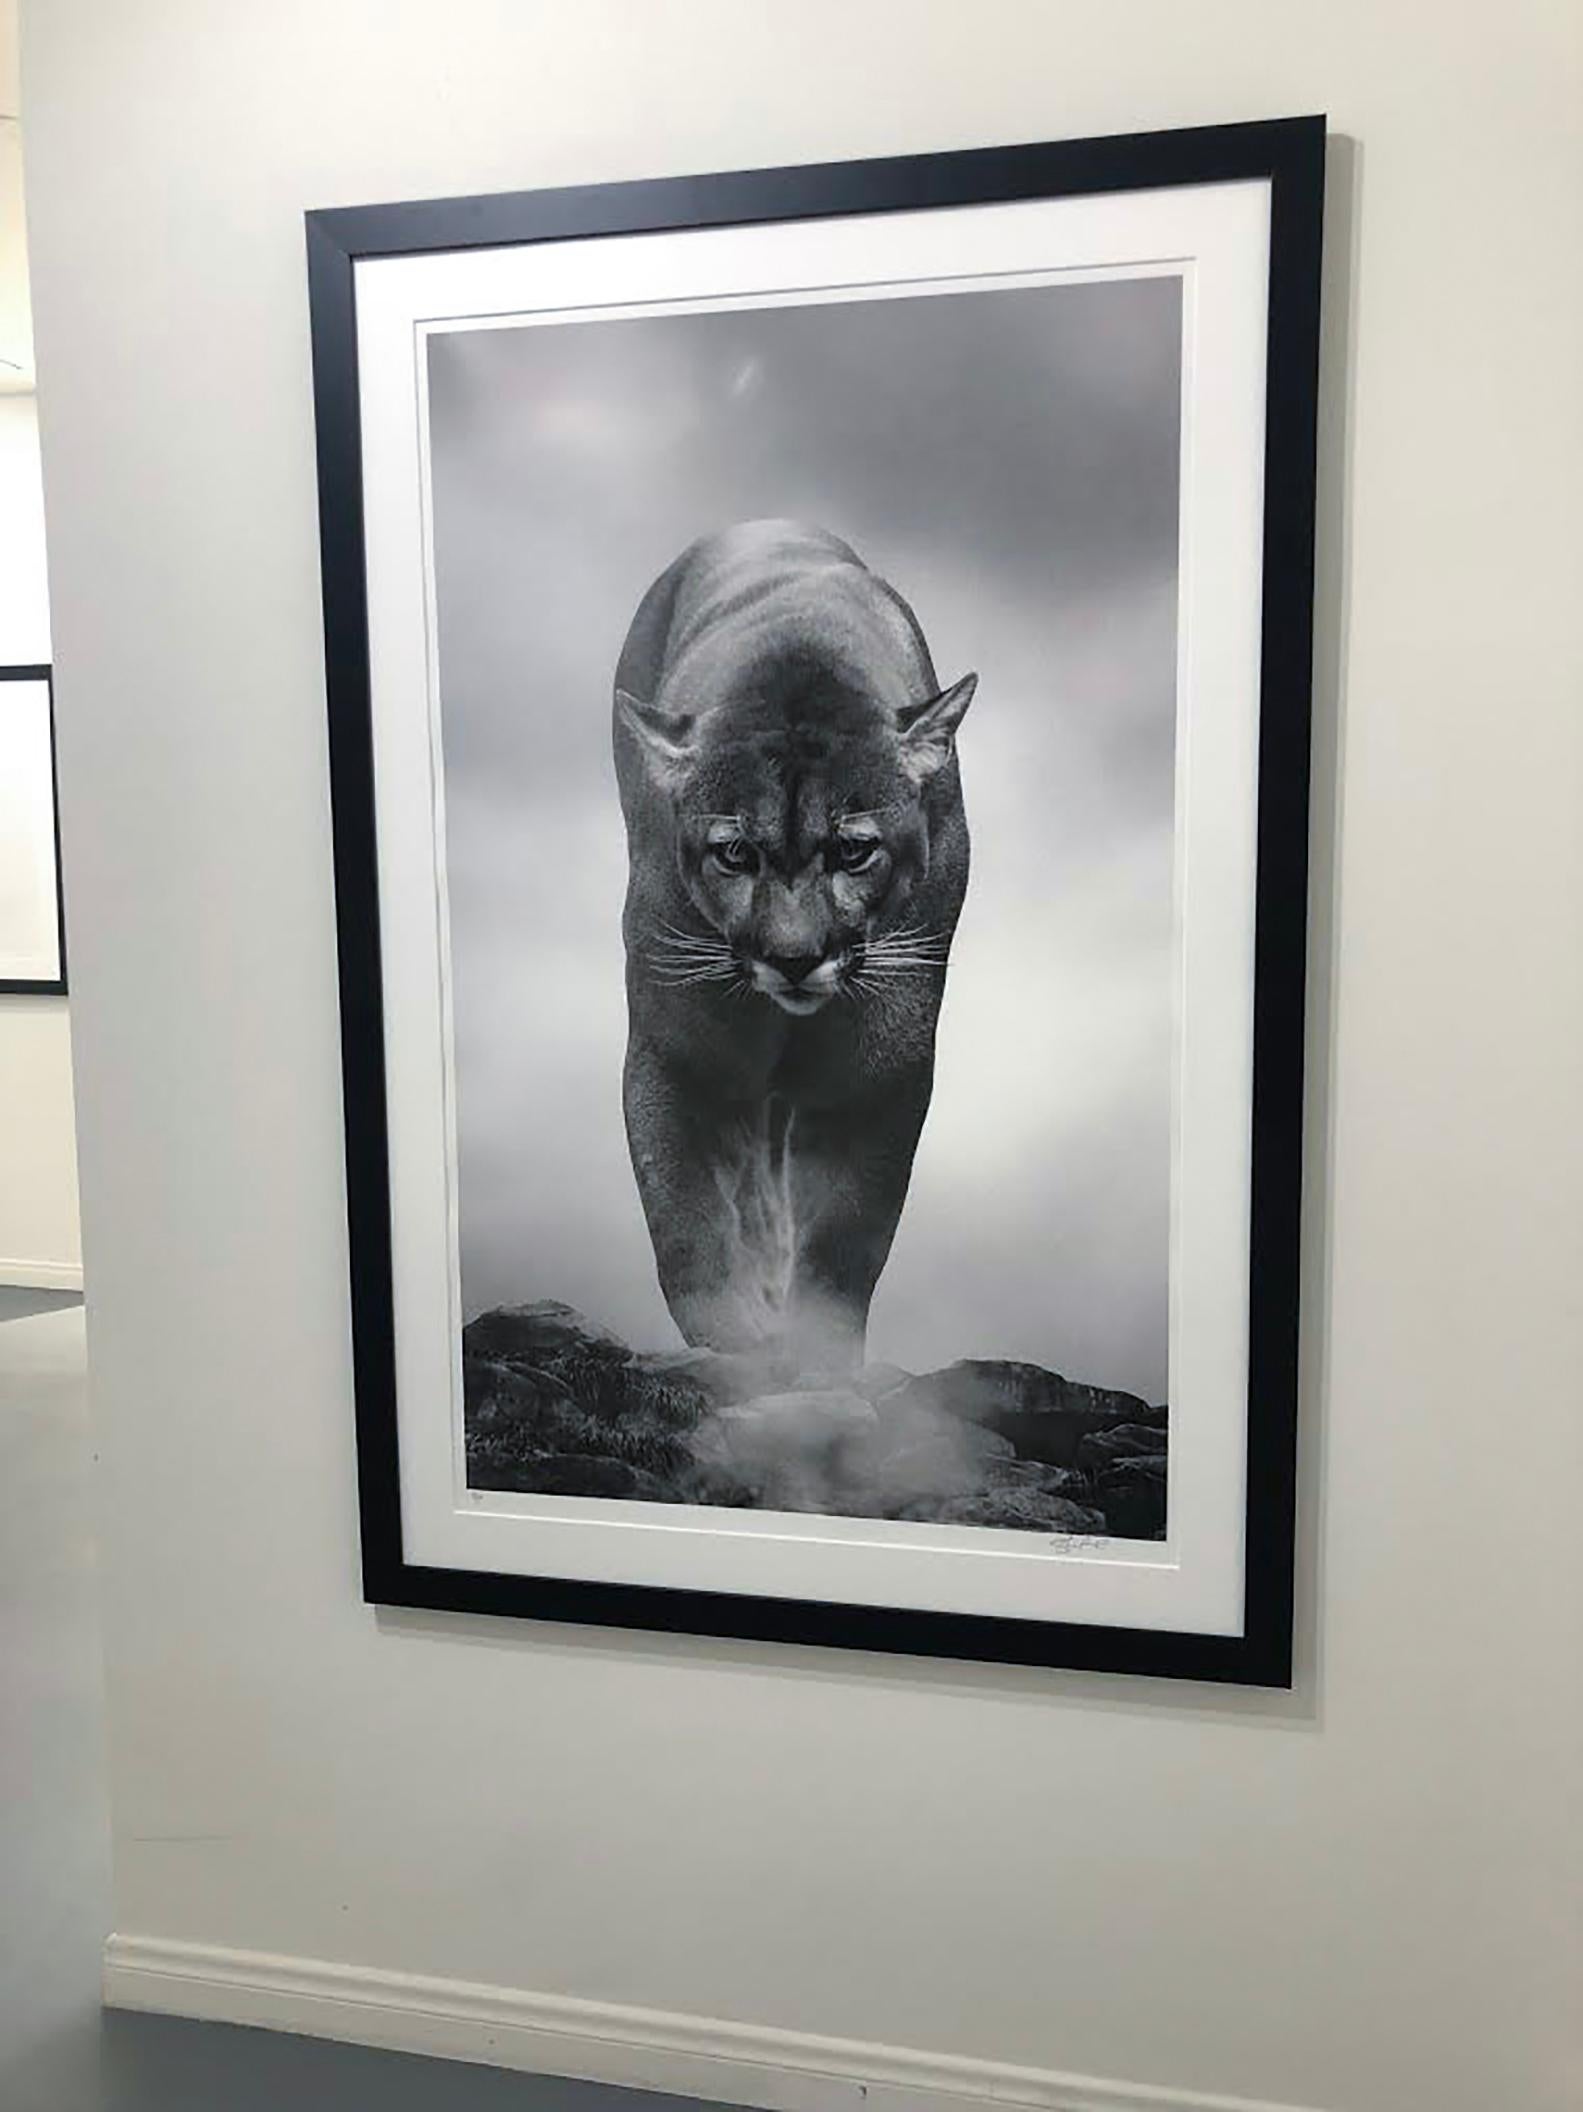 King of the Mountain 20x30 Black and White Photography, Cougar, Mountain Lion - Gray Landscape Photograph by Shane Russeck